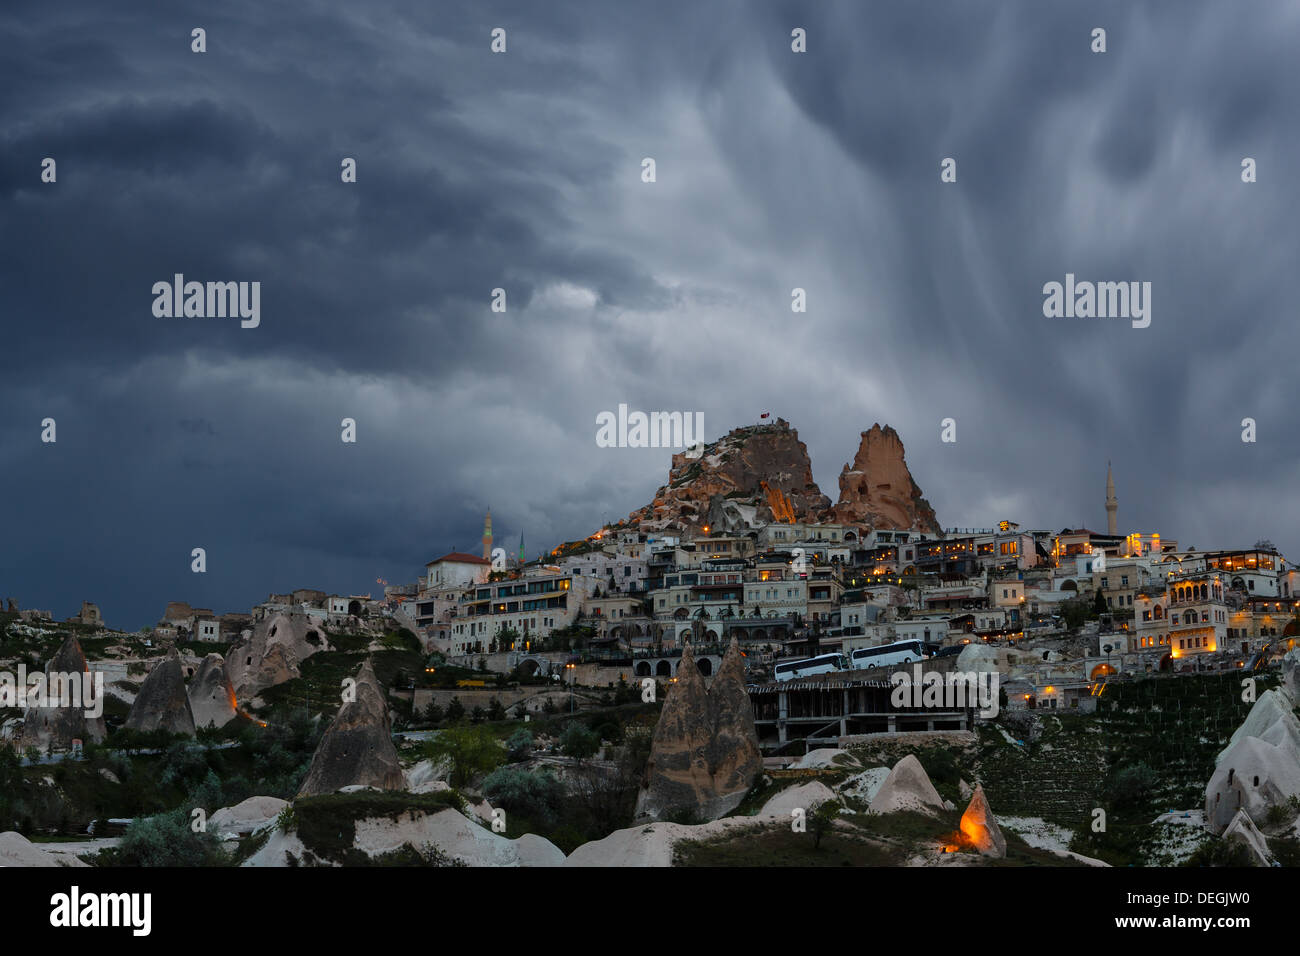 Cloudy twilight on the small town on a rock slope Stock Photo